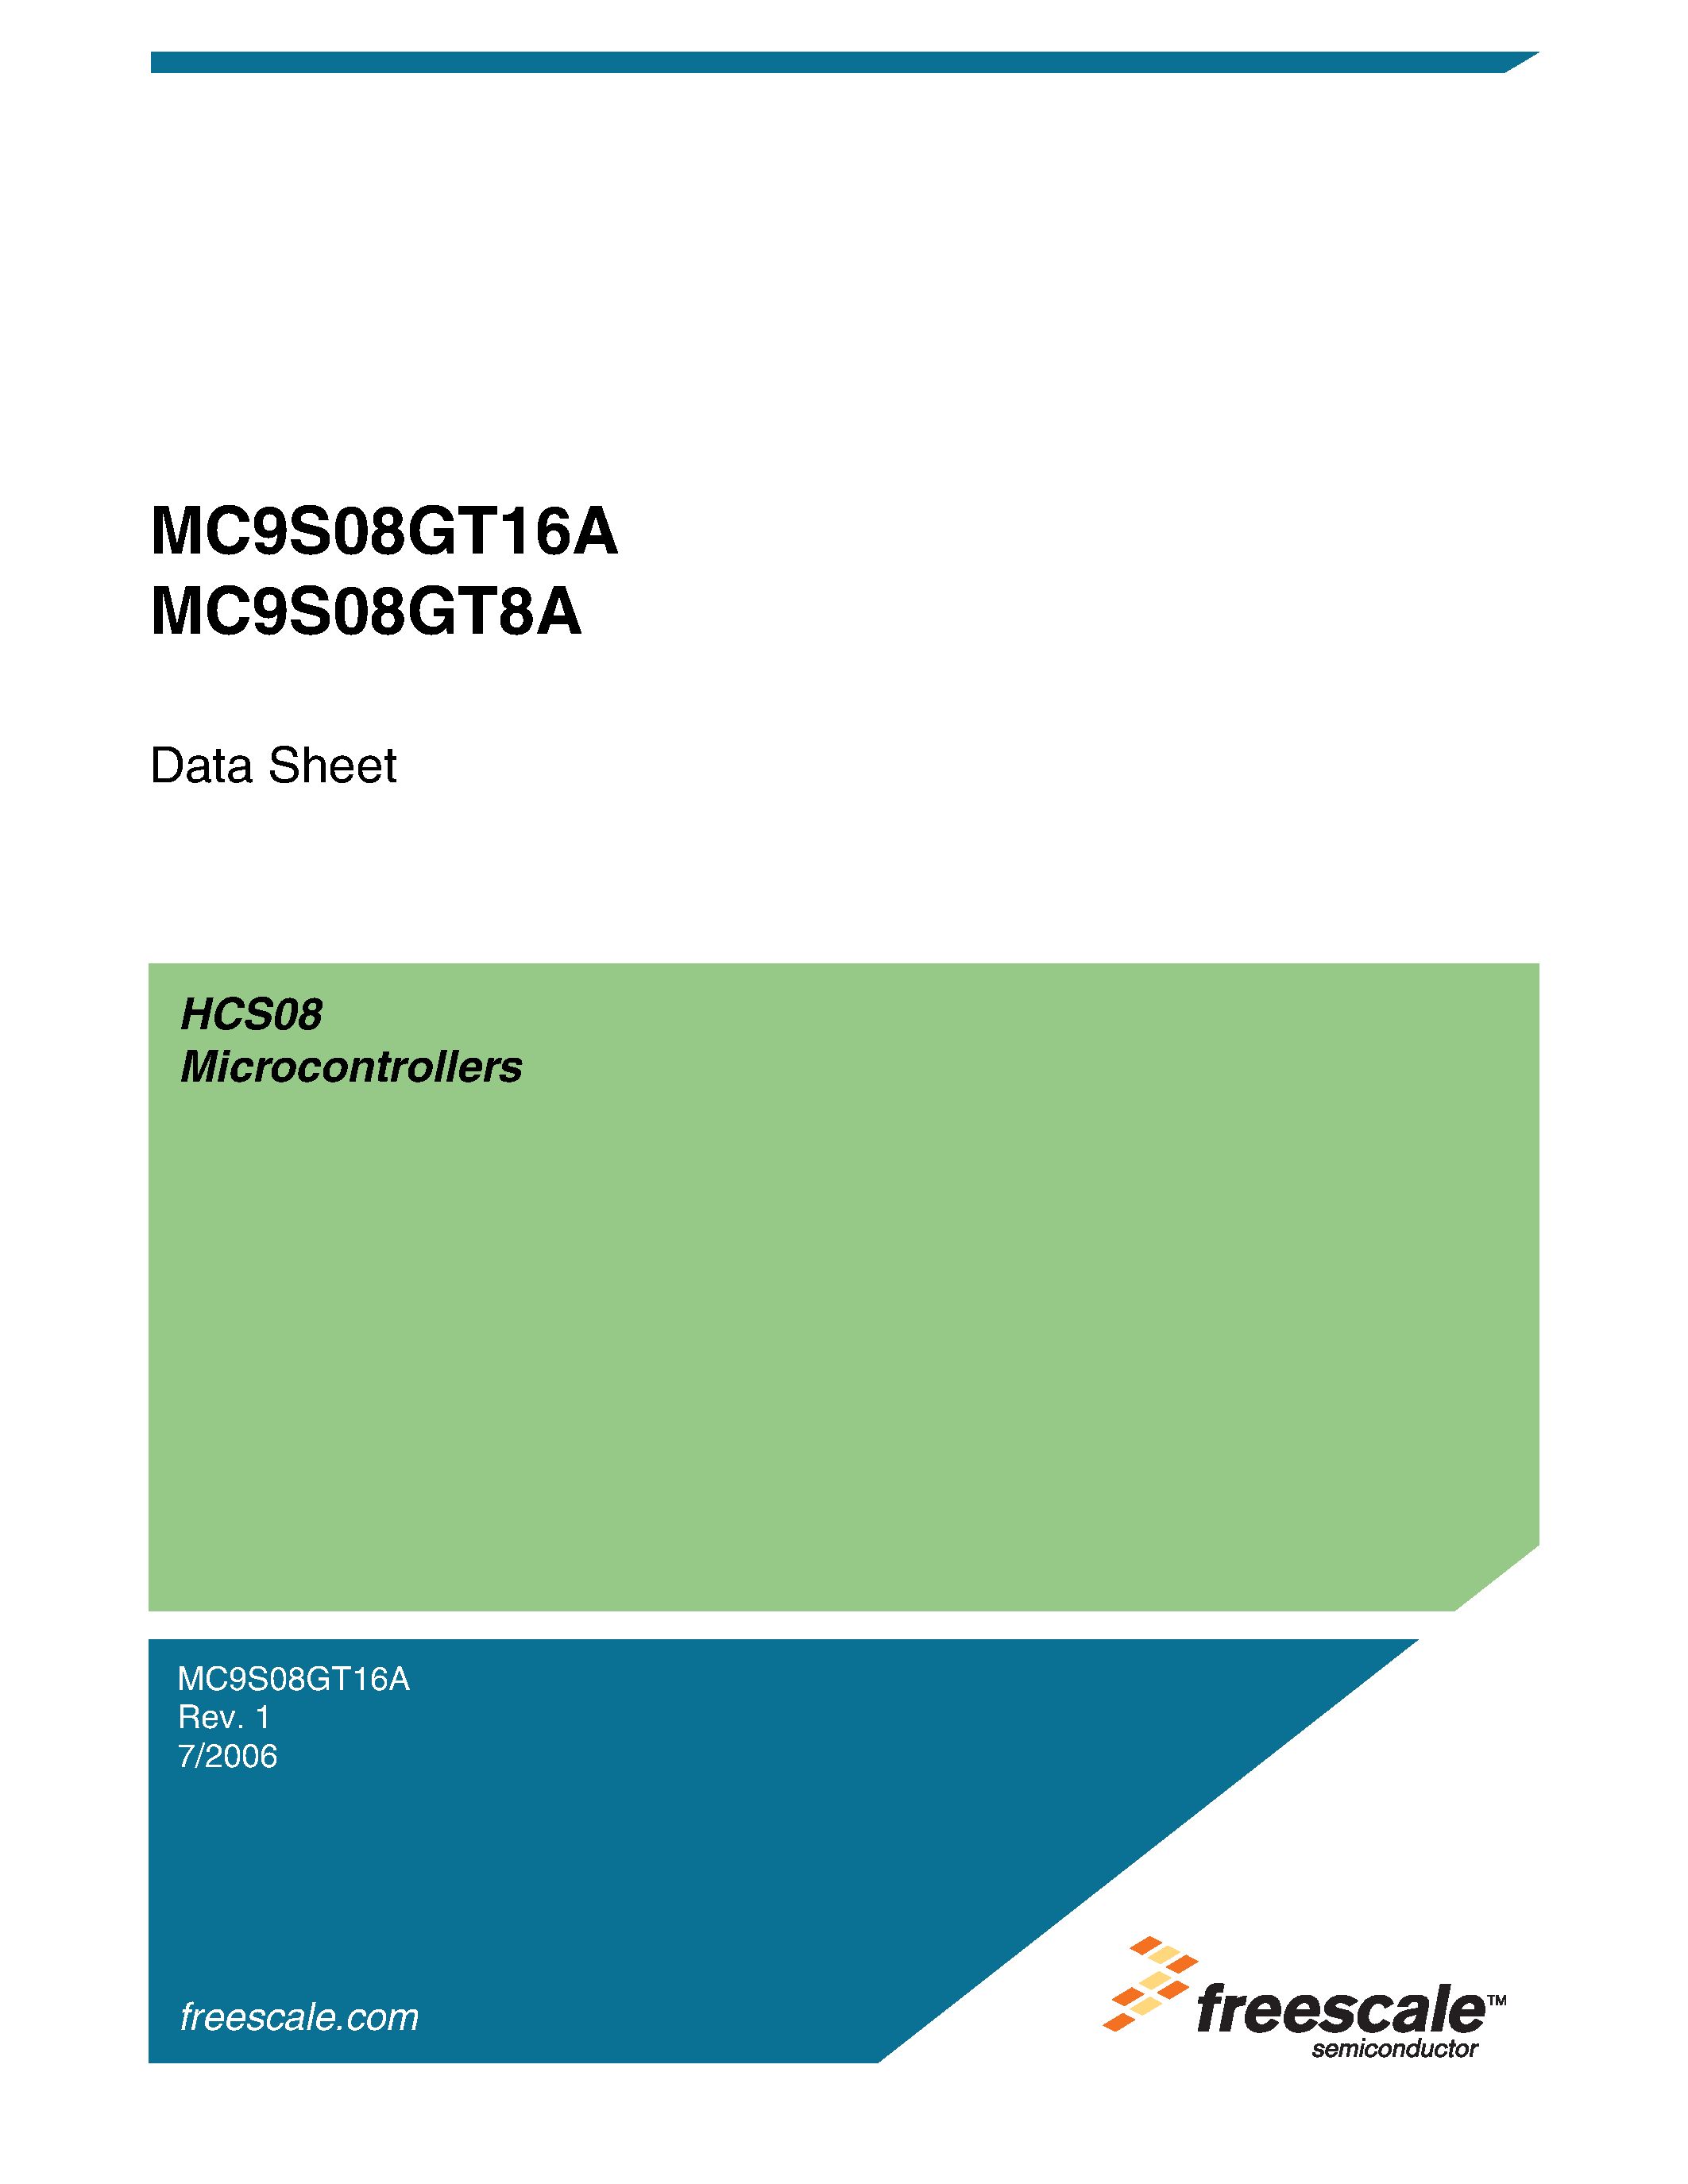 Datasheet MC9S08GT16A - (MC9S08GT8A / MC9S08GT16A) Microcontrollers page 1